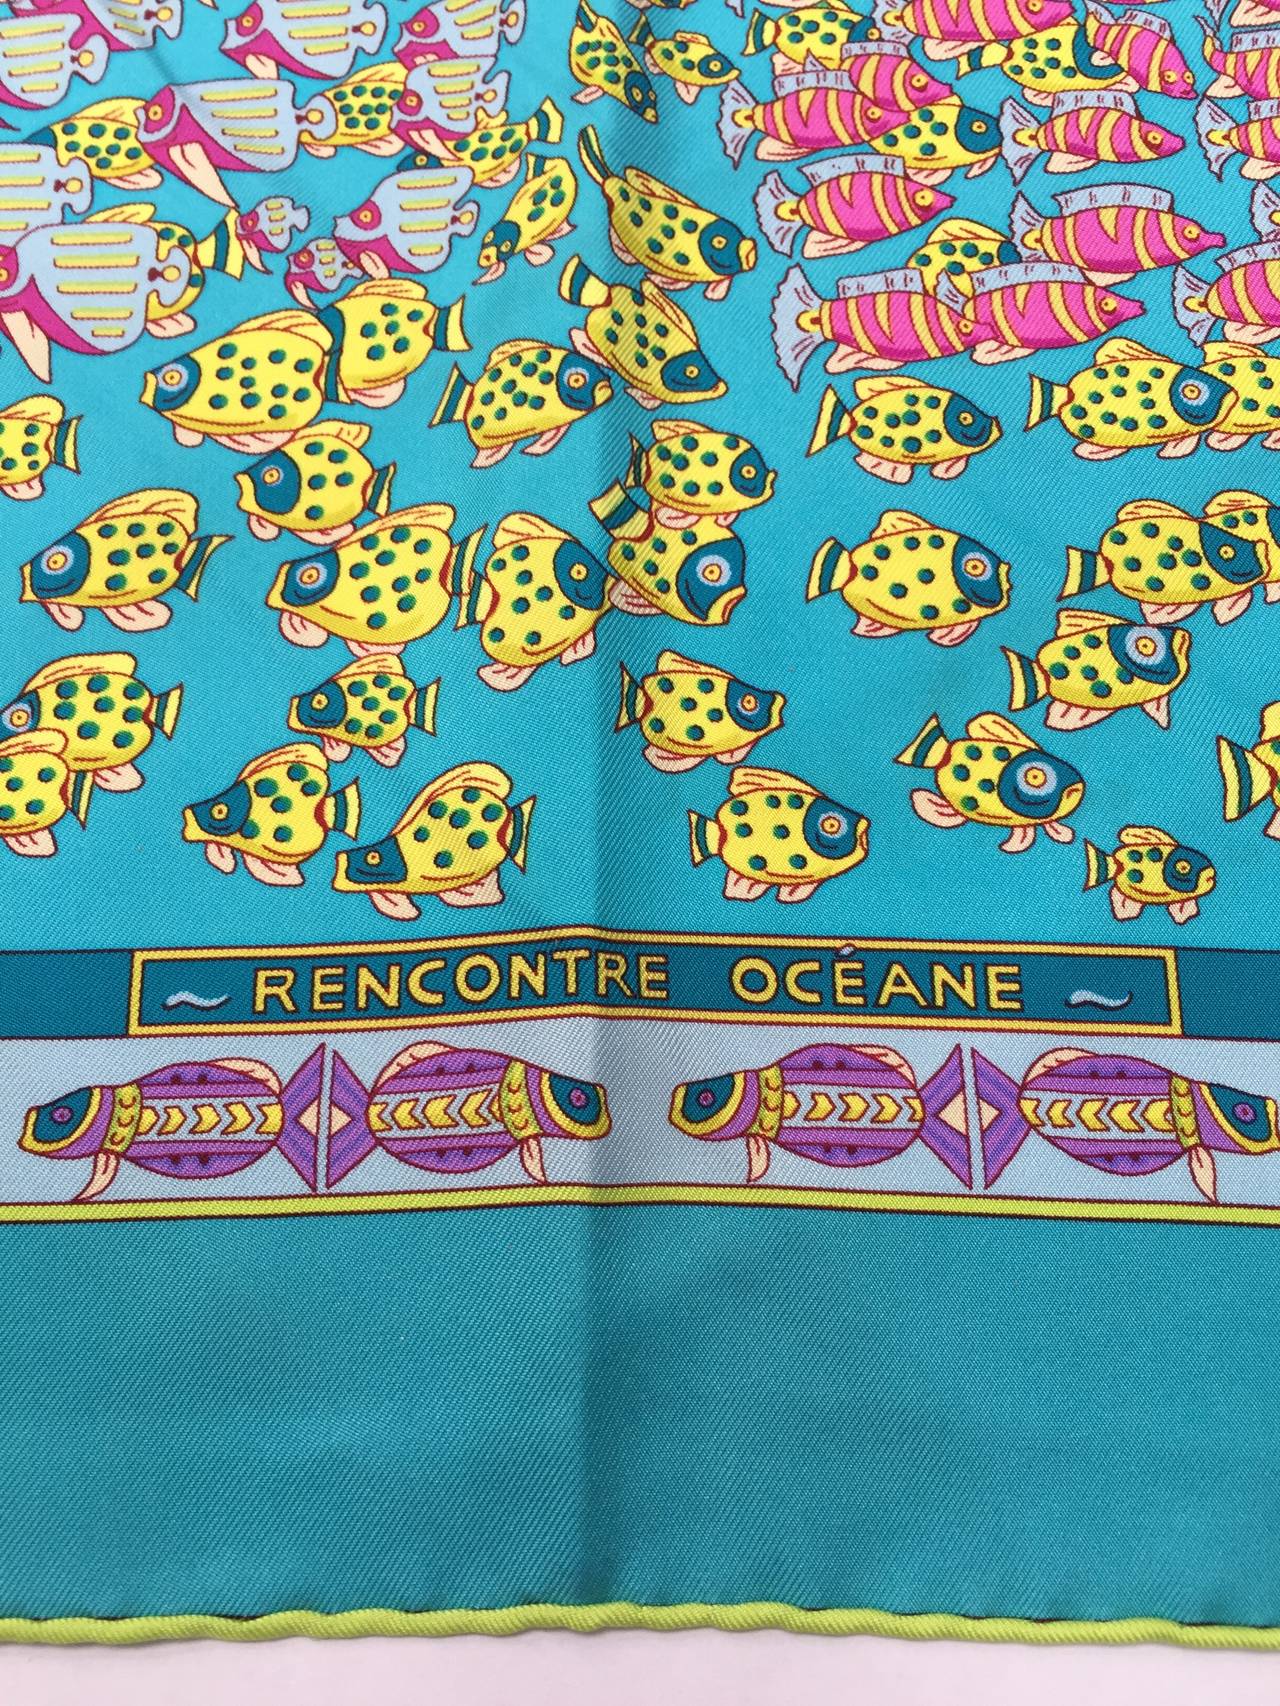 Hermes silk scarf from 2001 'Rencontre Oceane' by Annie Faivre. This is a most elegant colorway with a background in turquoise the color of the Caribbean waters with fish and corals in every bright cheerful color. Annie Faivre has drawn this vibrant